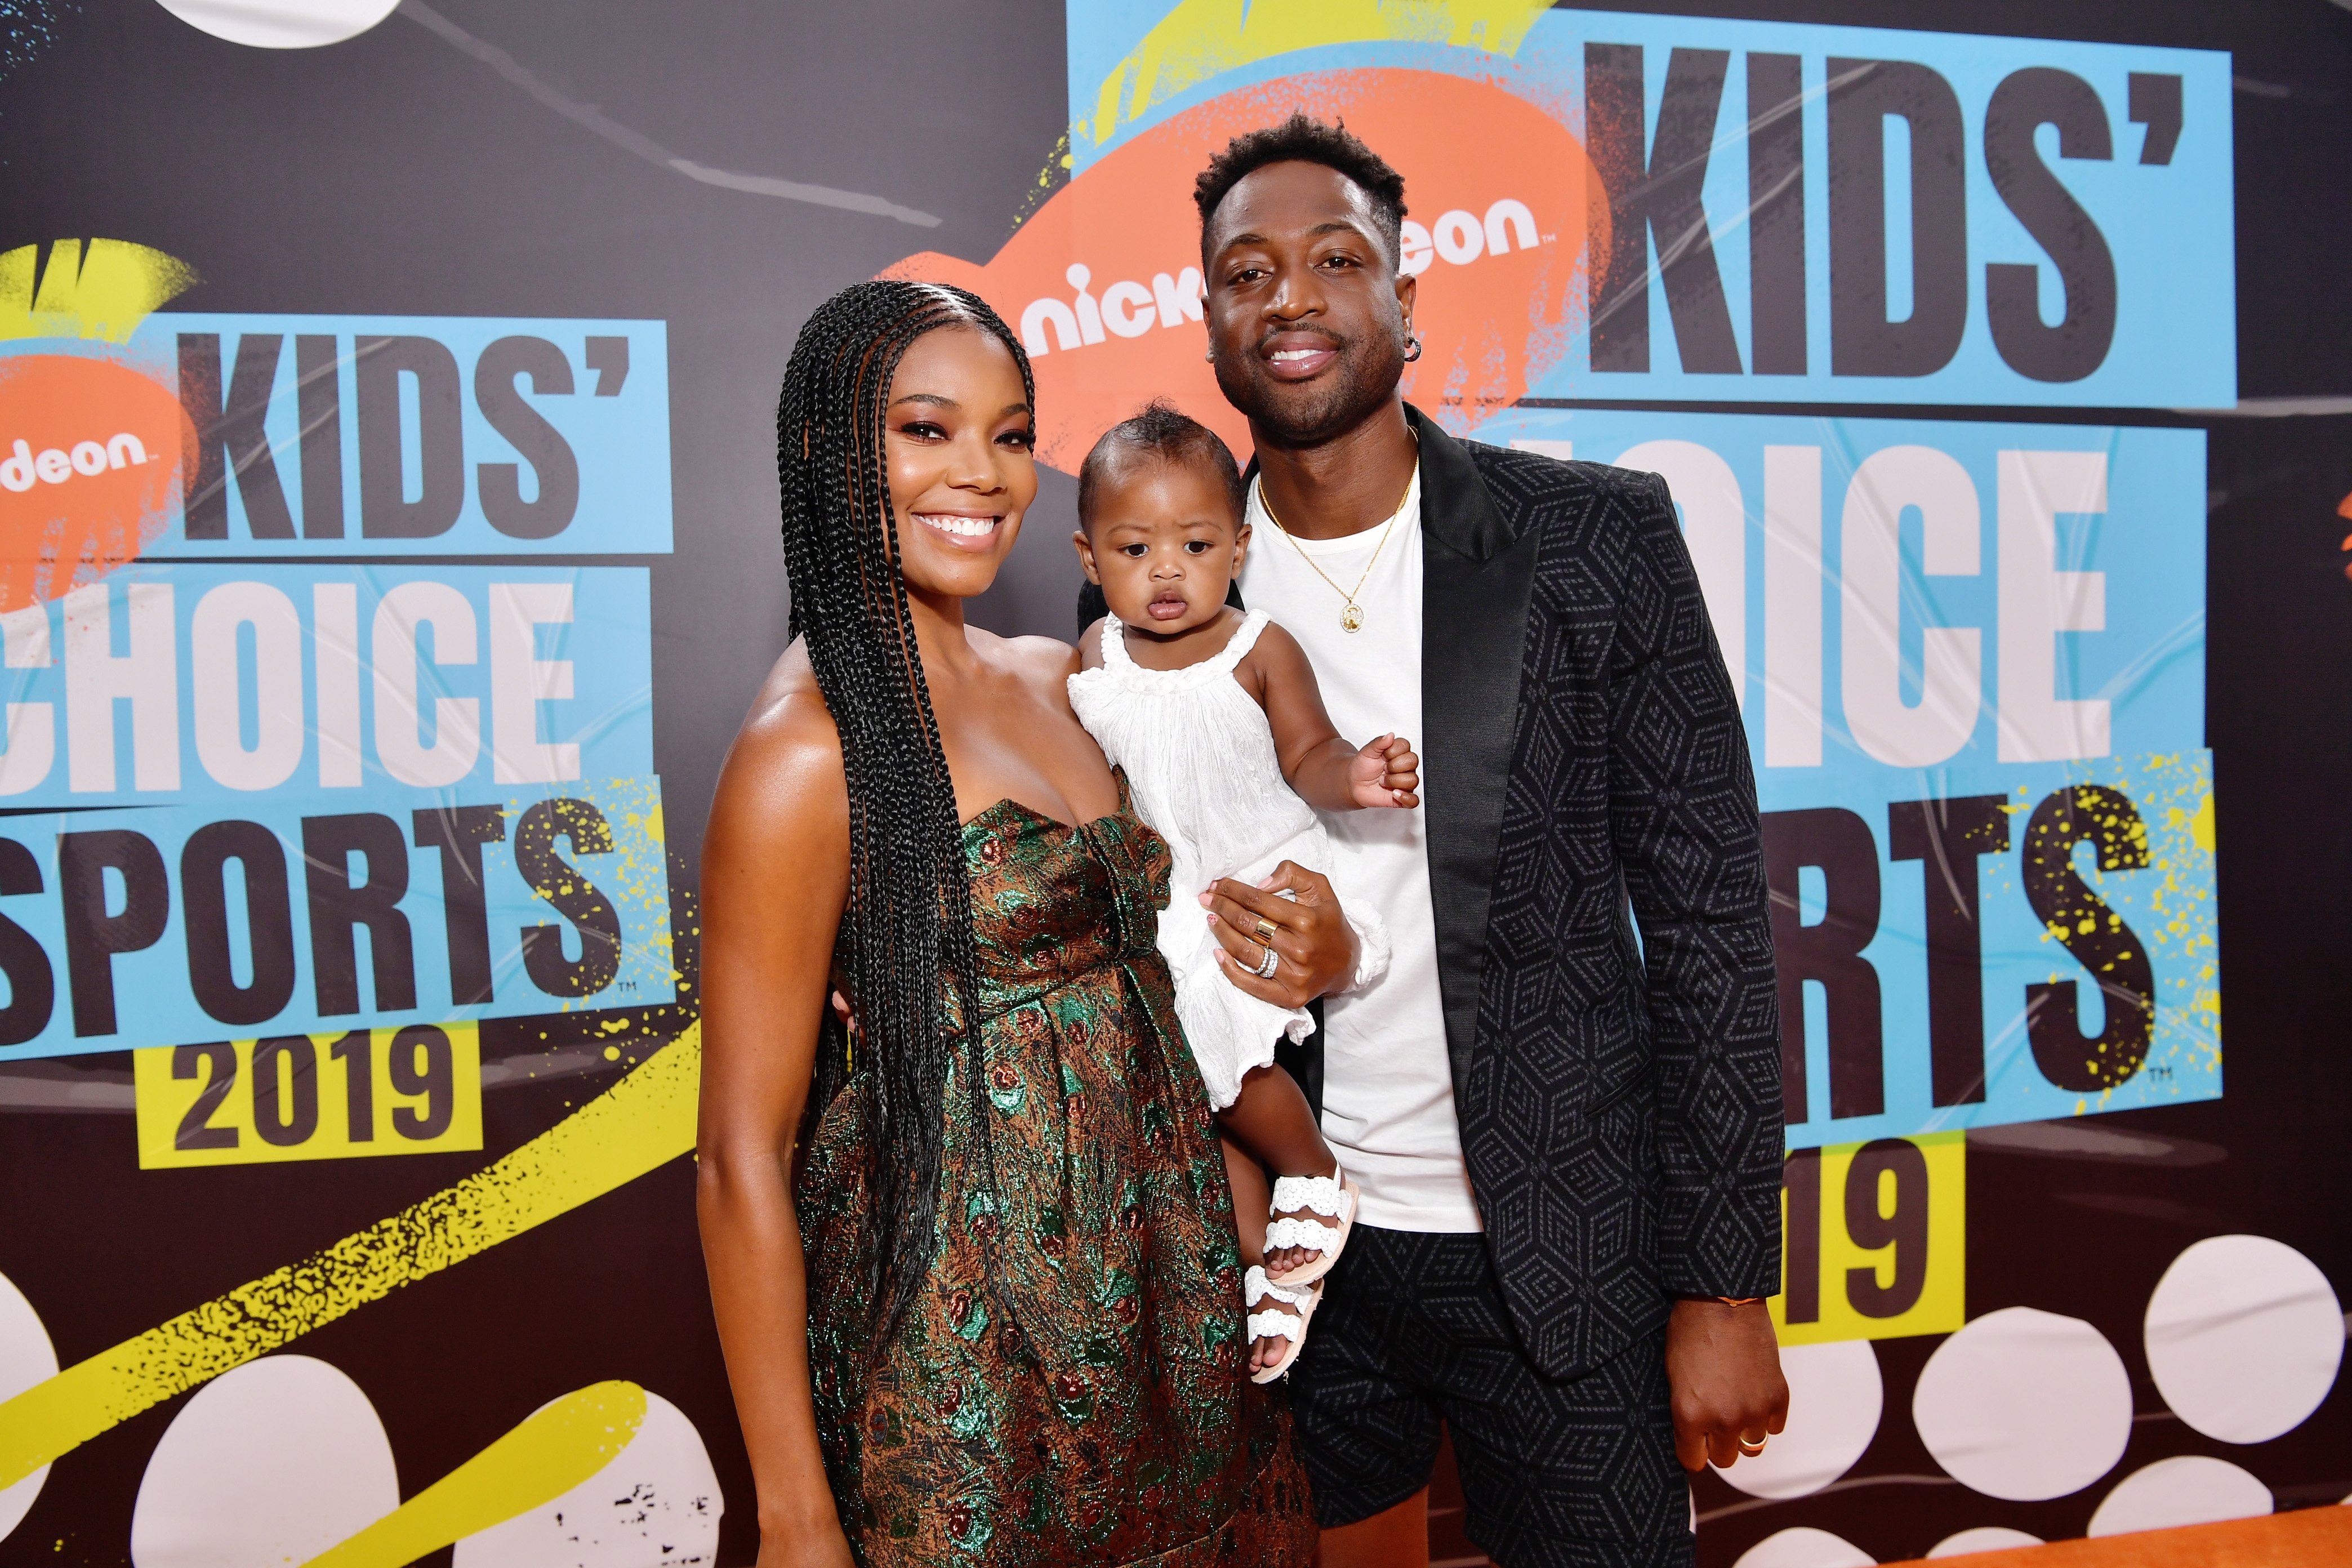 Gabrielle Union and Dwyane Wade attend Nickelodeon Kids' Choice Sports 2019 at Barker Hangar on July 11, 2019 | Photo: Getty Images